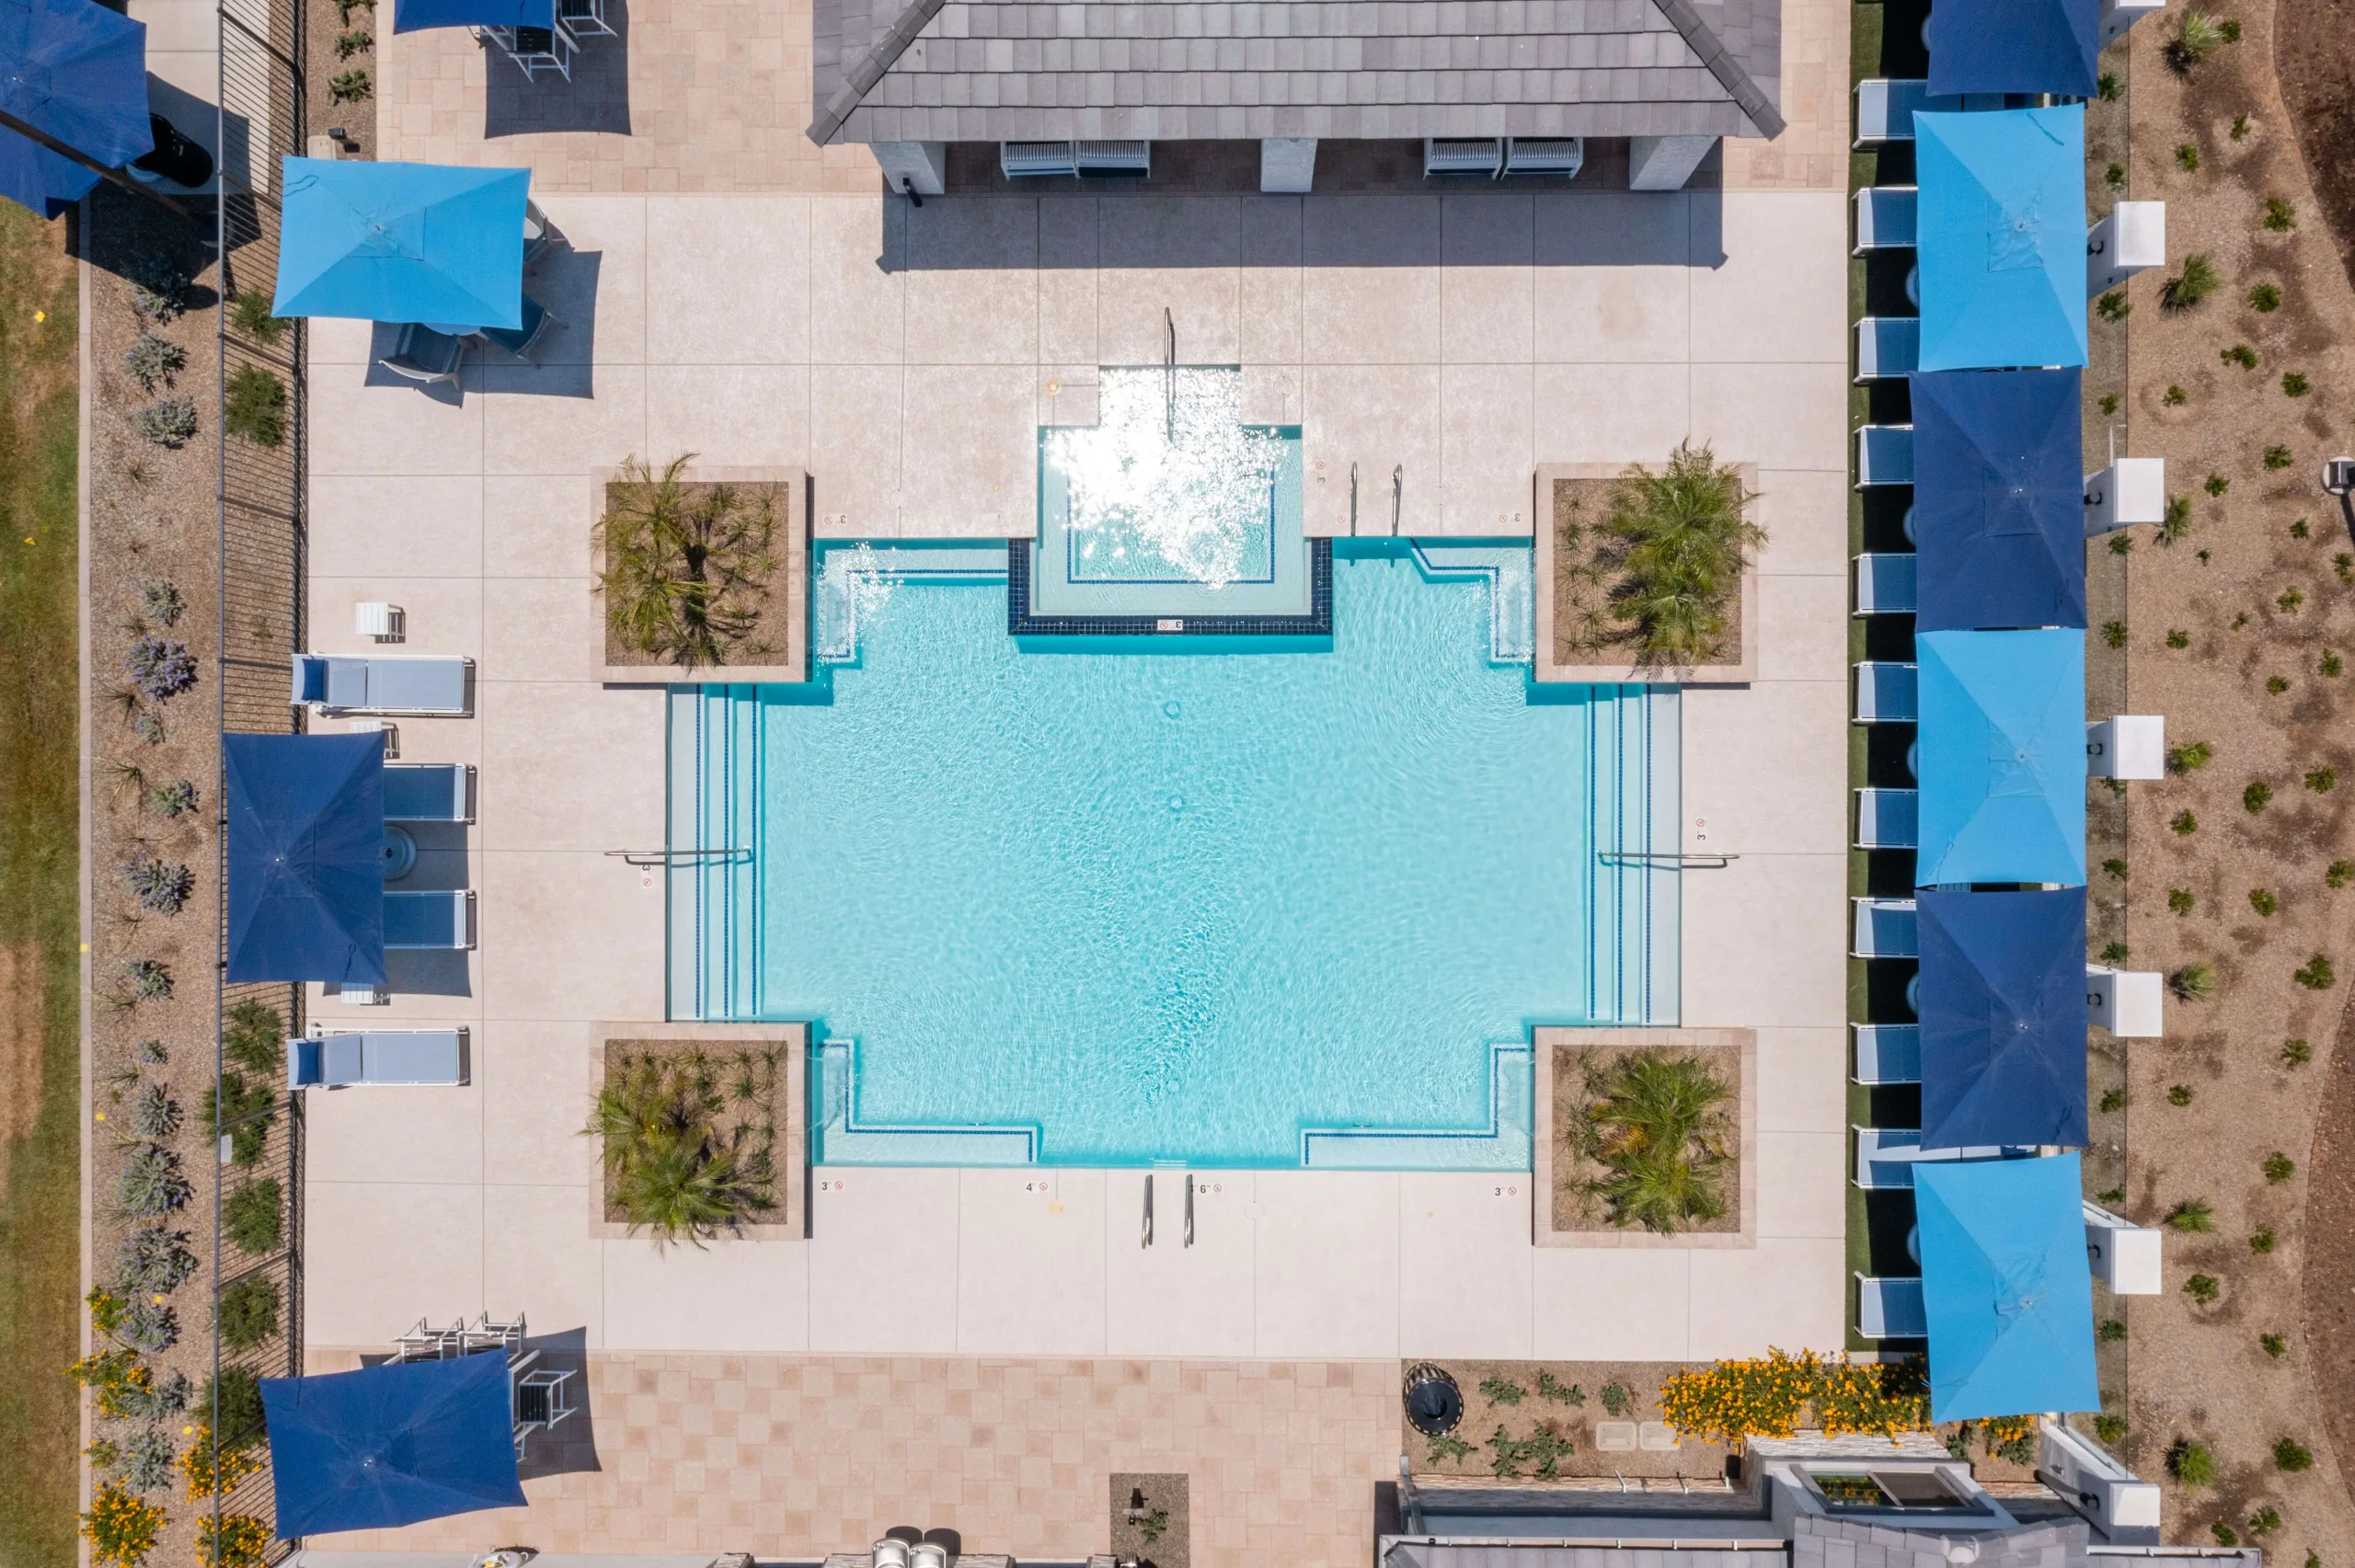 Aerial view of pool and spa deck with water features, outdoor covered pergola, and lawn chairs on grass.